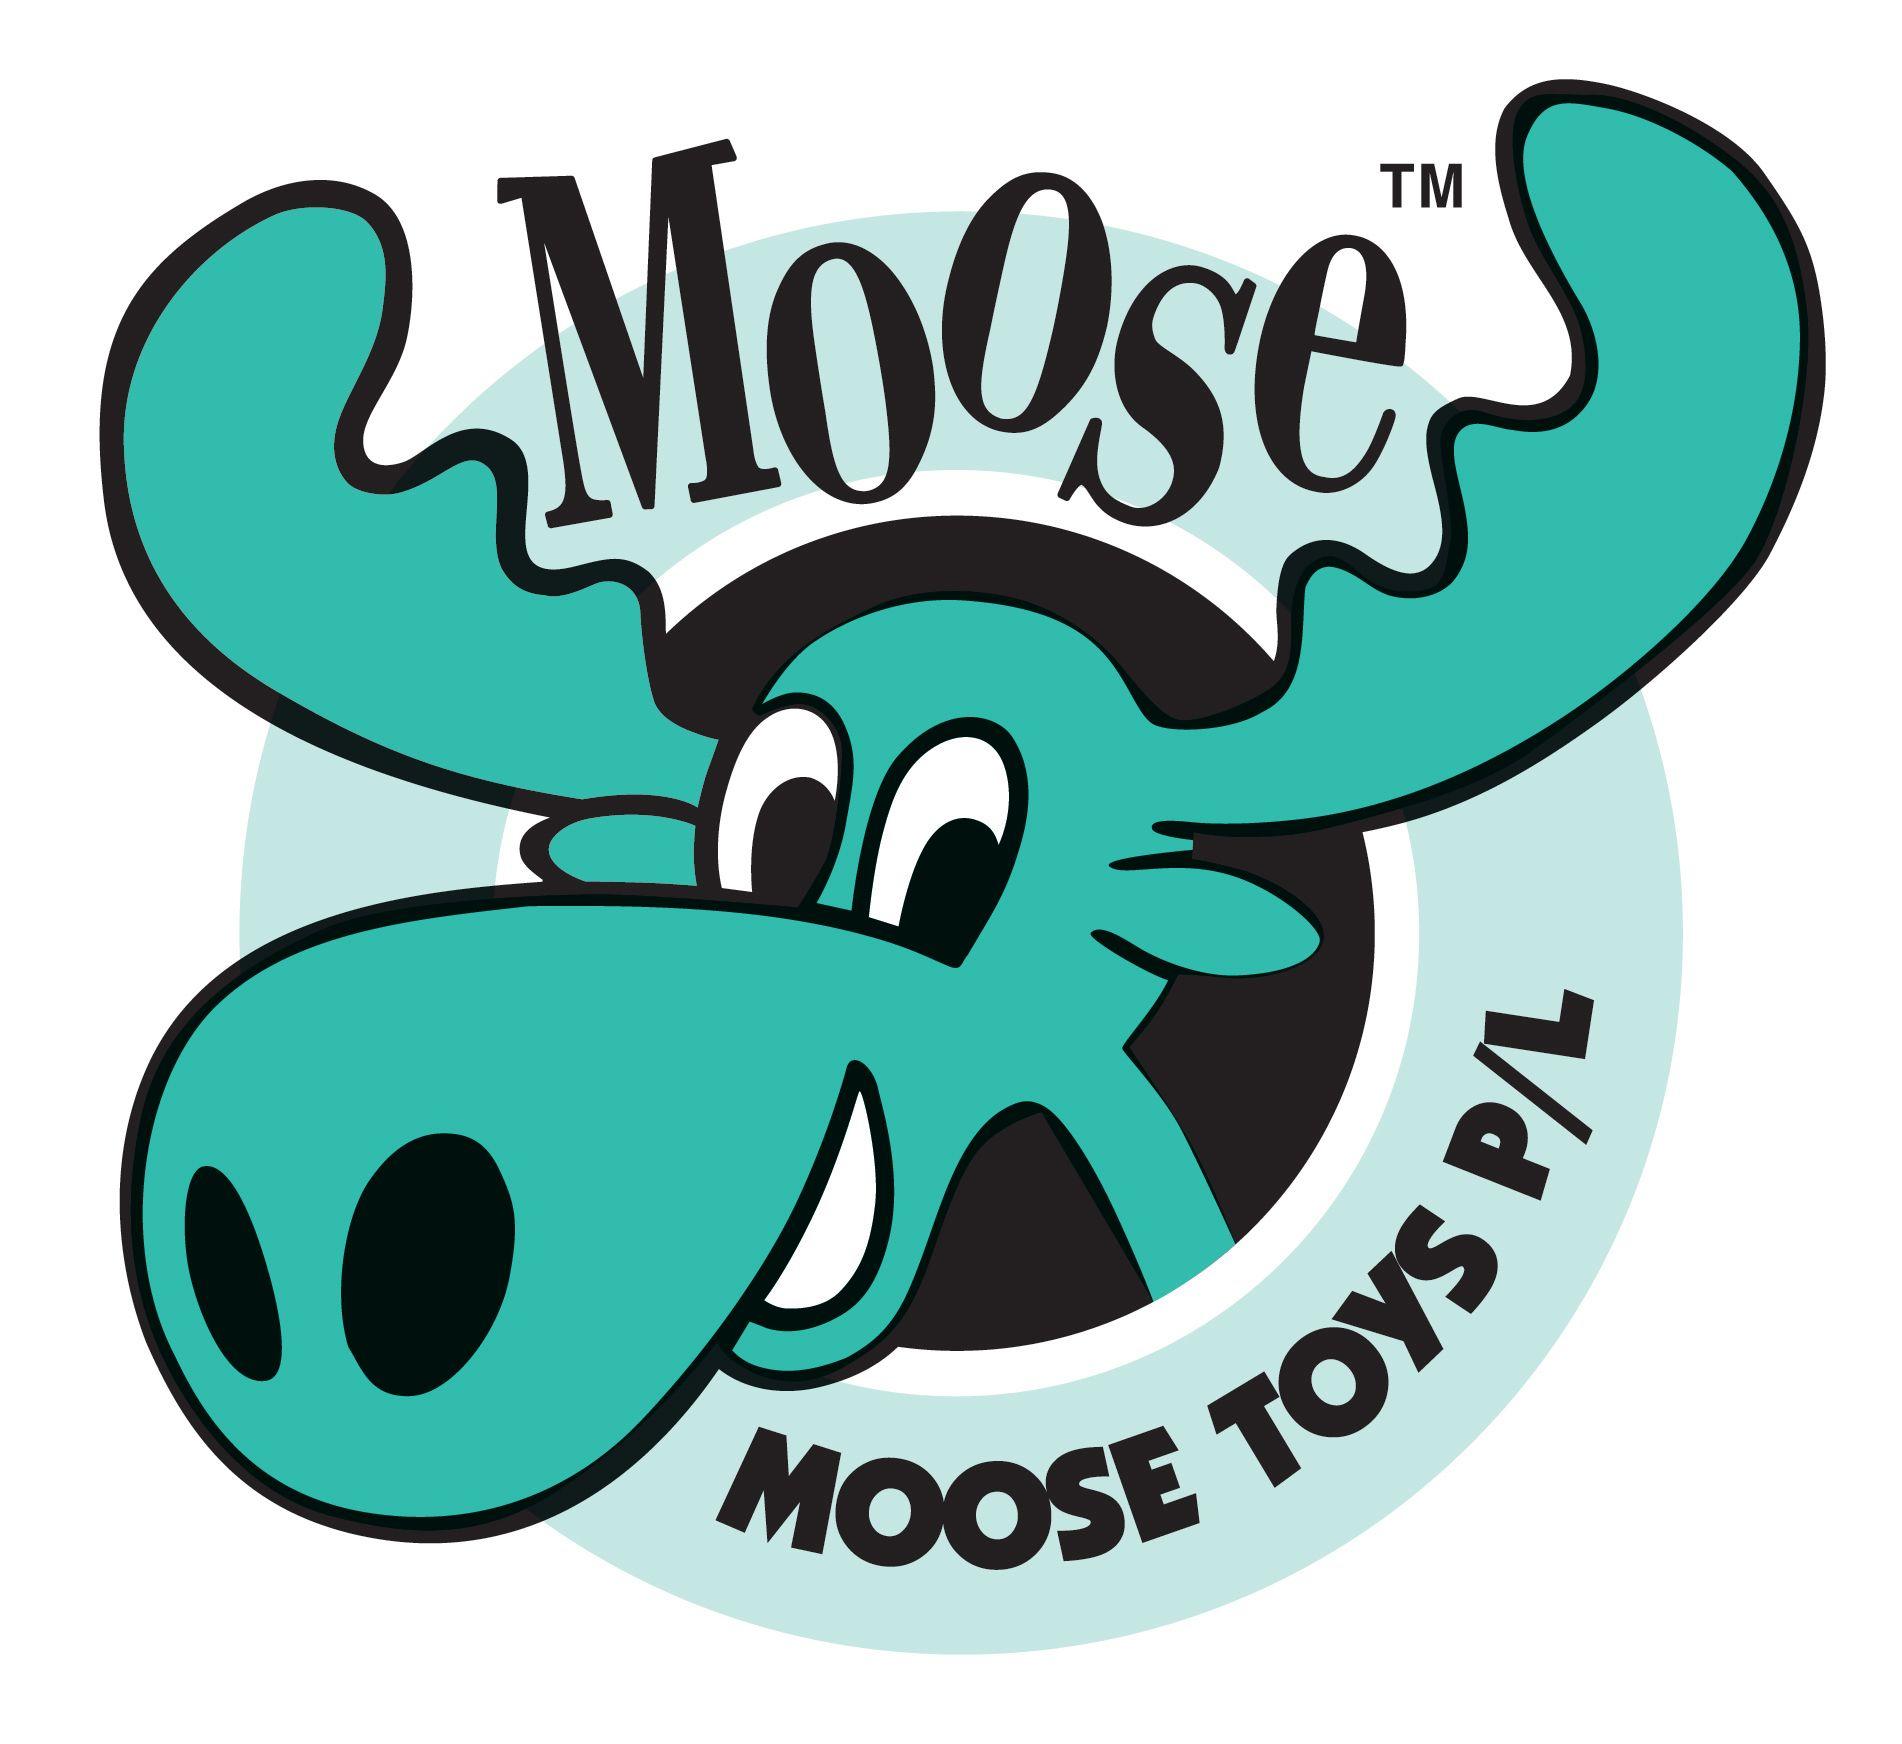 Who Has a Moose Logo - Moose Toys(TM) Introduces The Ugglys(TM), Rude and Repulsive